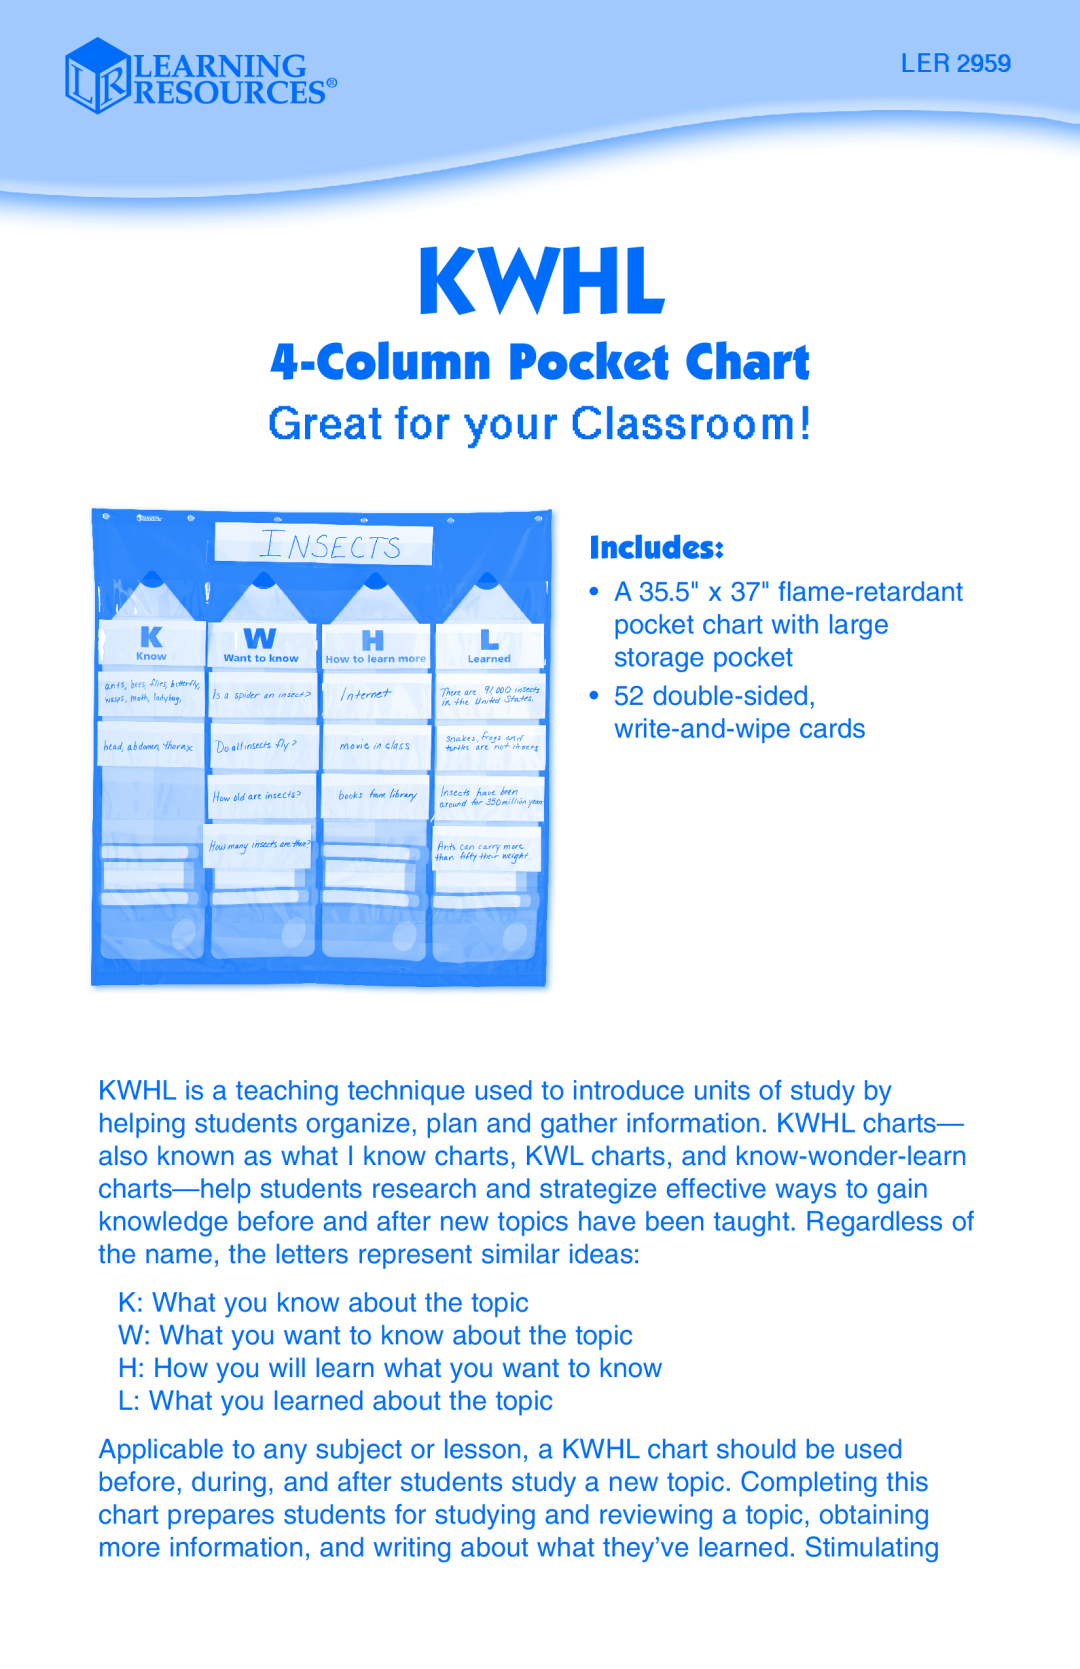 Learning Resources LER 2959 manual Includes, Kwhl, Column Pocket Chart 